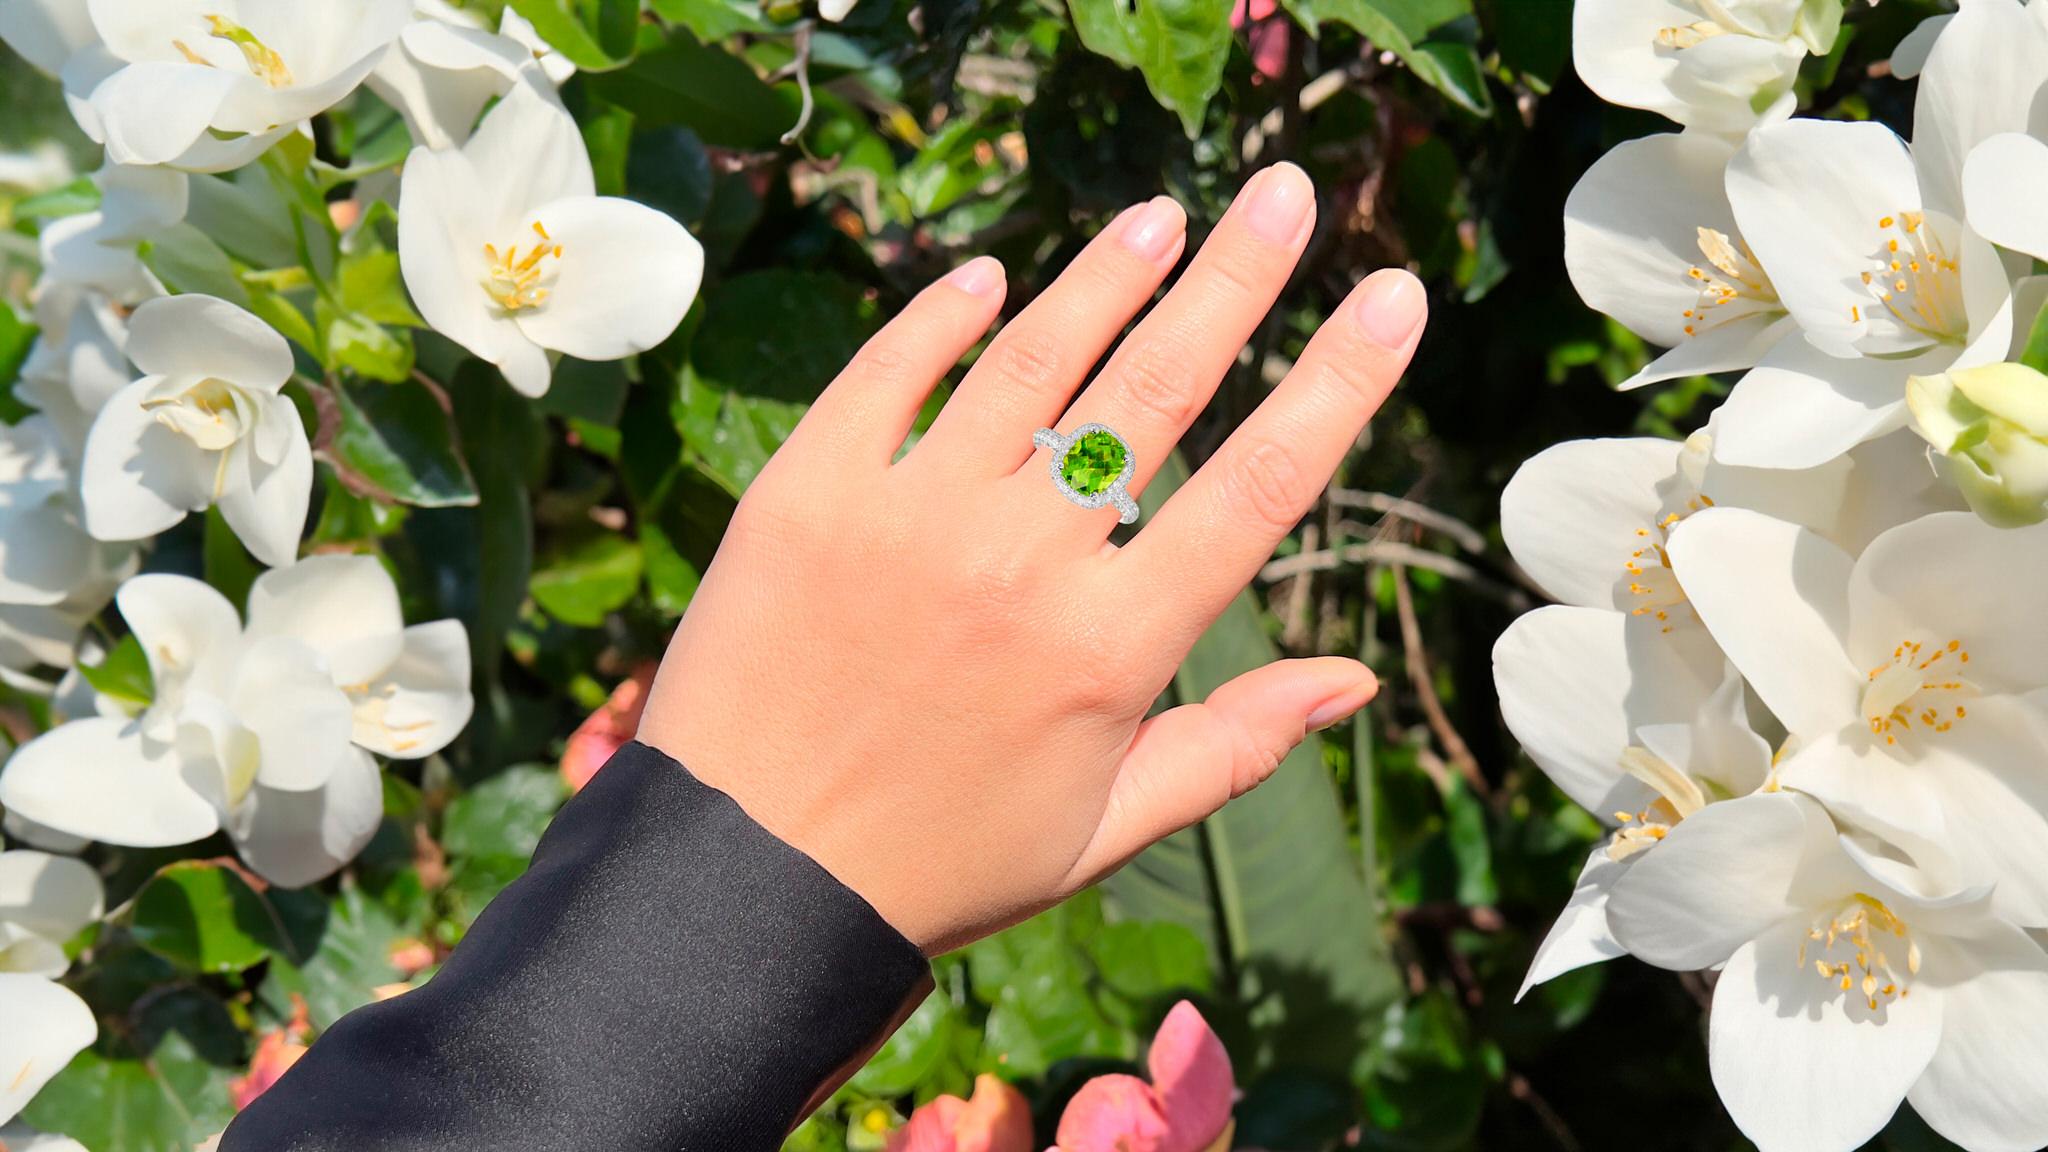 It comes with the Gemological Appraisal by GIA GG/AJP
All Gemstones are Natural
Peridot = 3.59 Carat
152 Round Diamonds = 1.10 Carats
Metal: 18K White Gold
Ring Size: 6.5* US
*It can be resized complimentary
